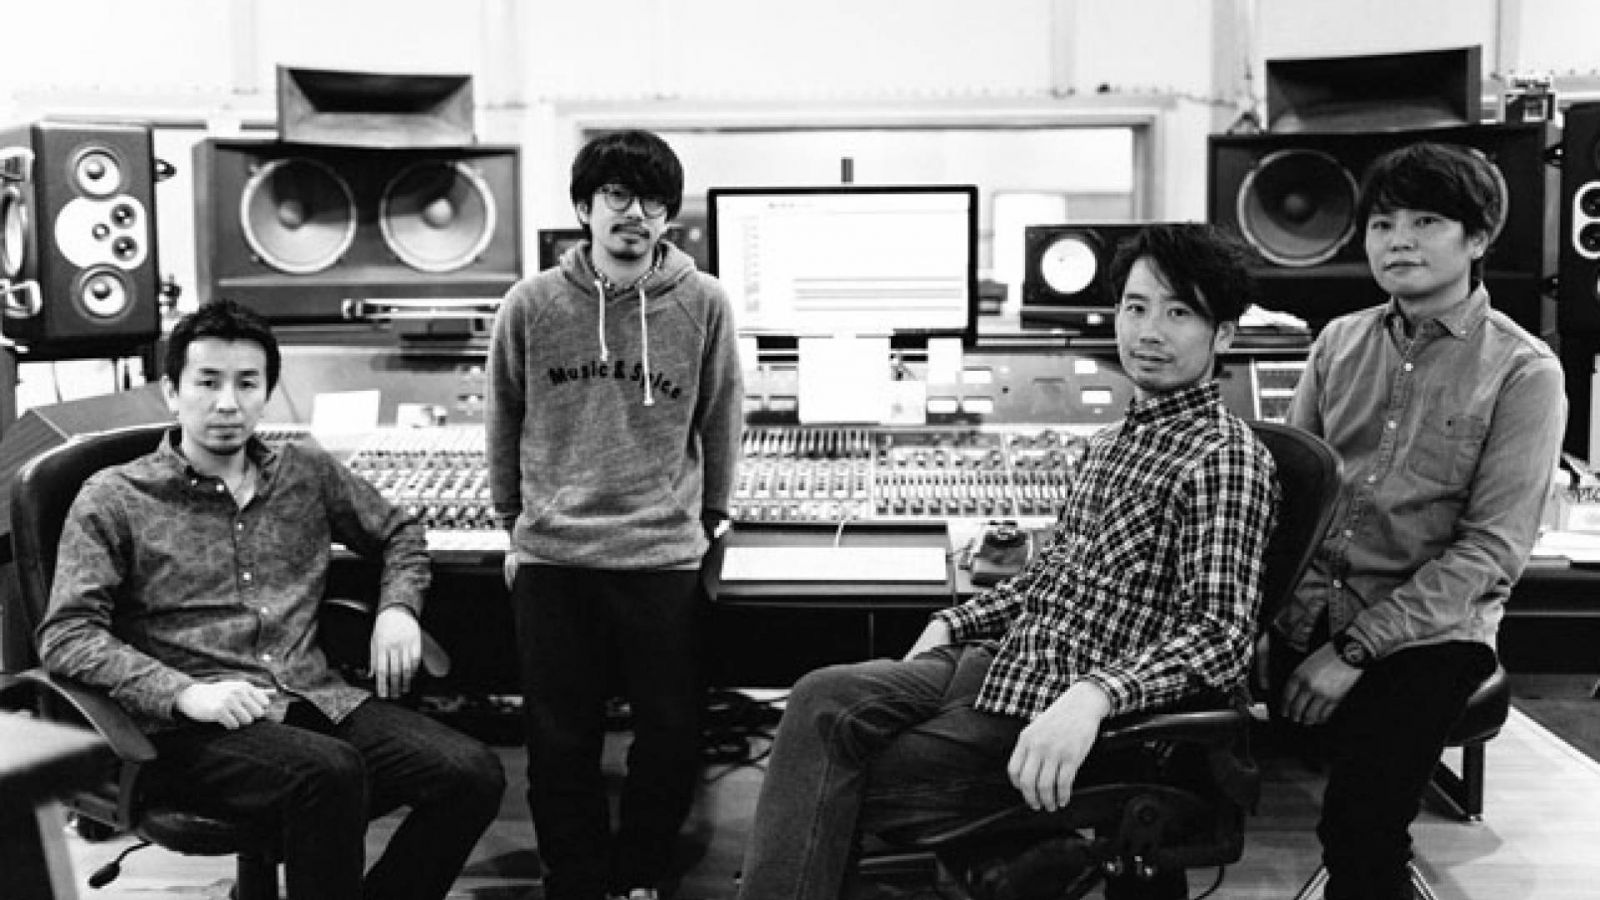 Gira europea de ASIAN KUNG-FU GENERATION © 2015 Sony Music Entertainment (Japan) Inc. All rights reserved.